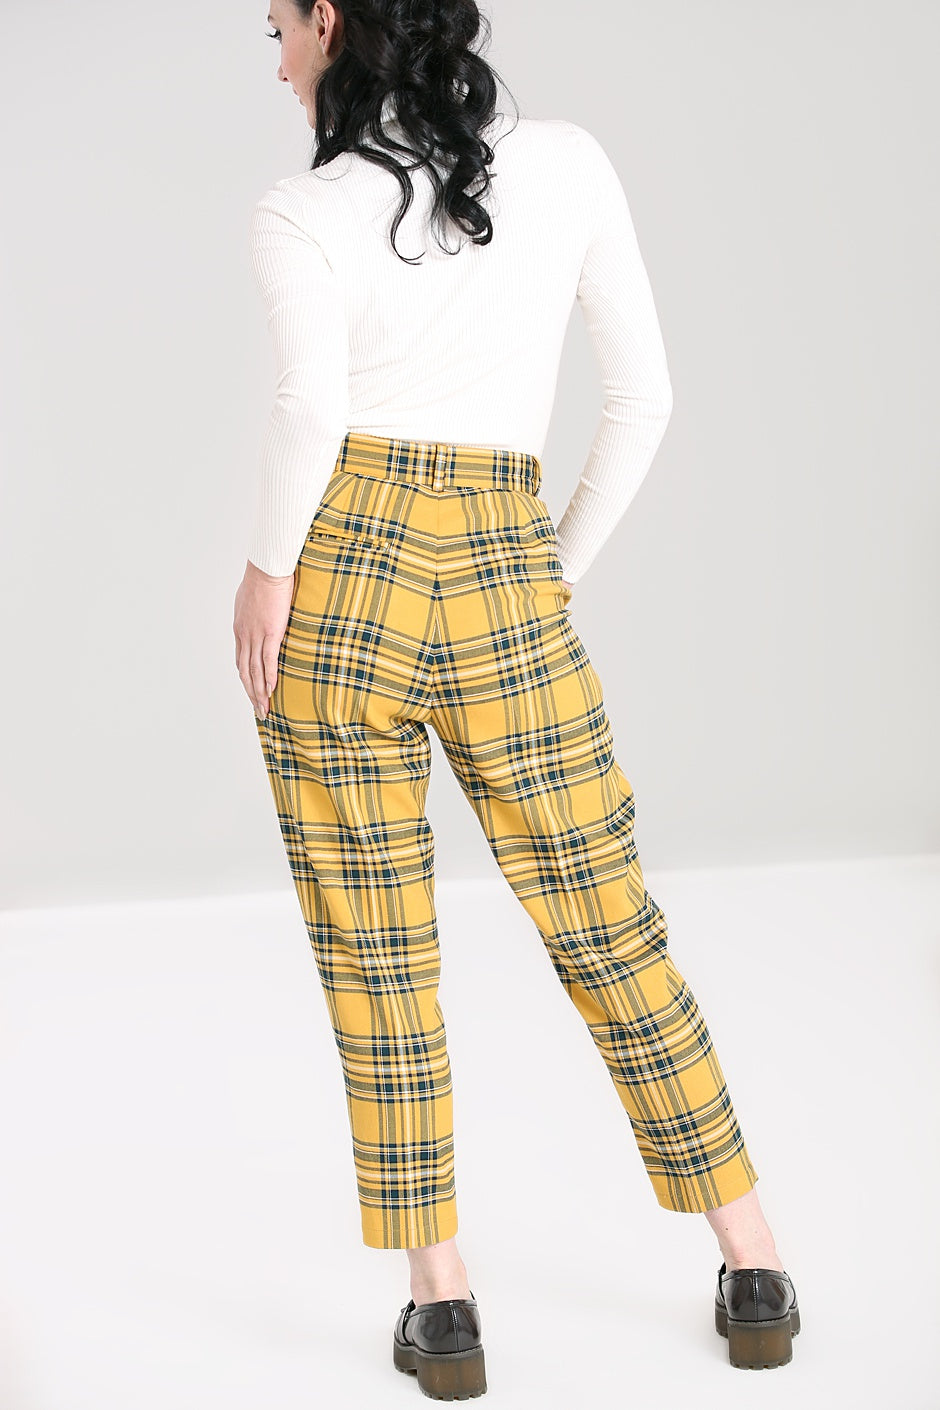 Black  Yellow Plaid Trousers  These retro styled  Depop